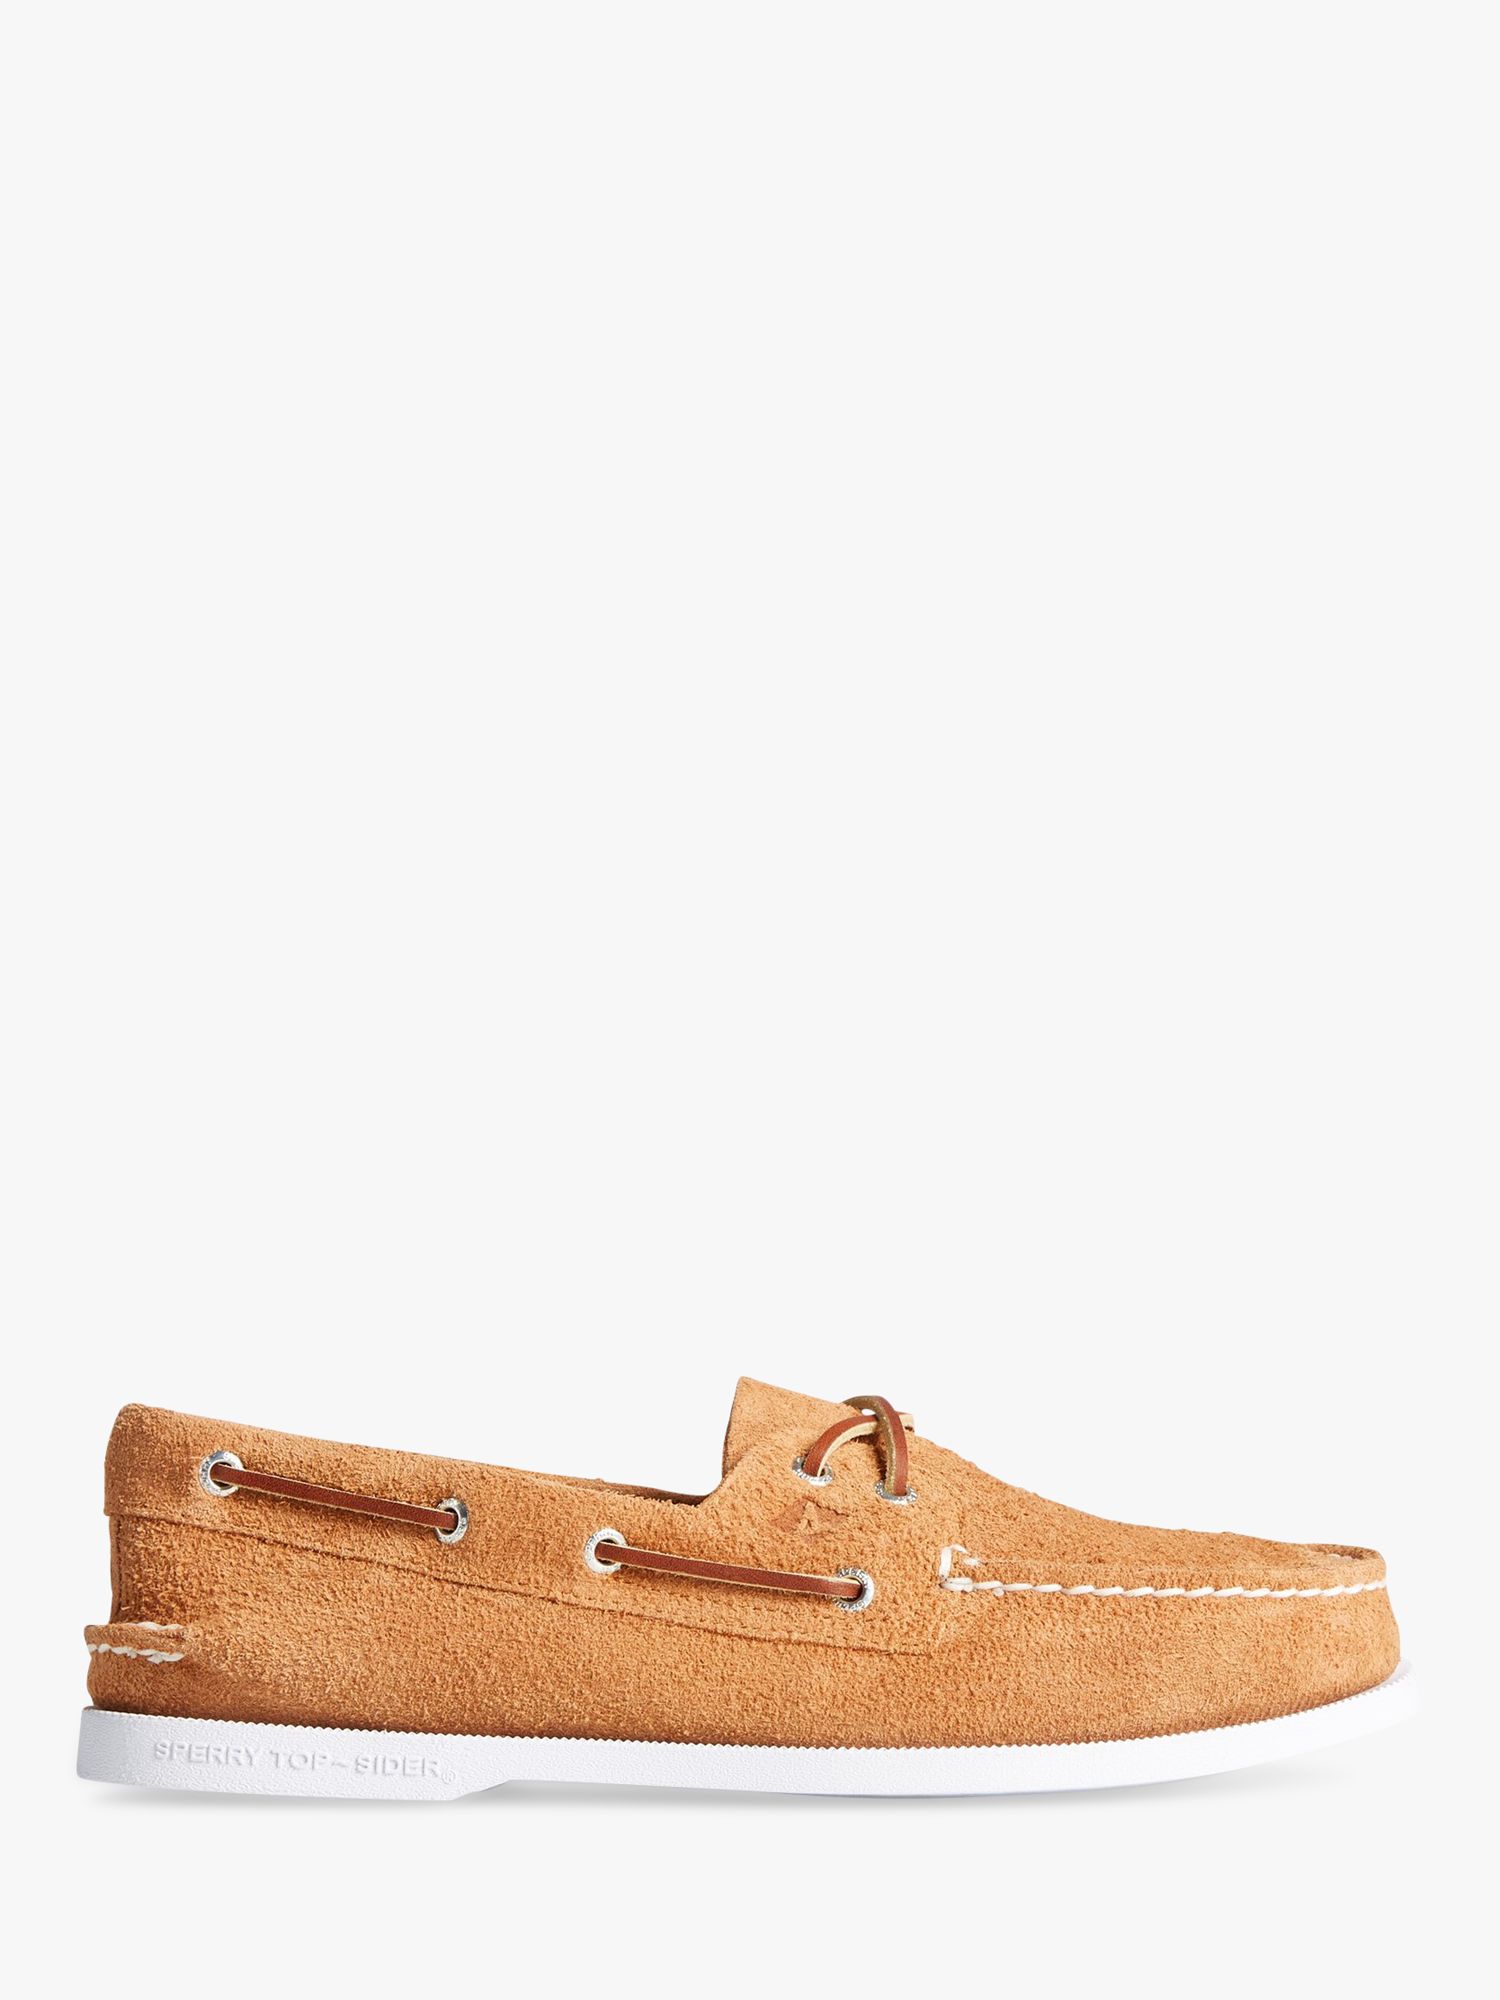 Sperry Authentic Original Hairy Suede Boat Shoes